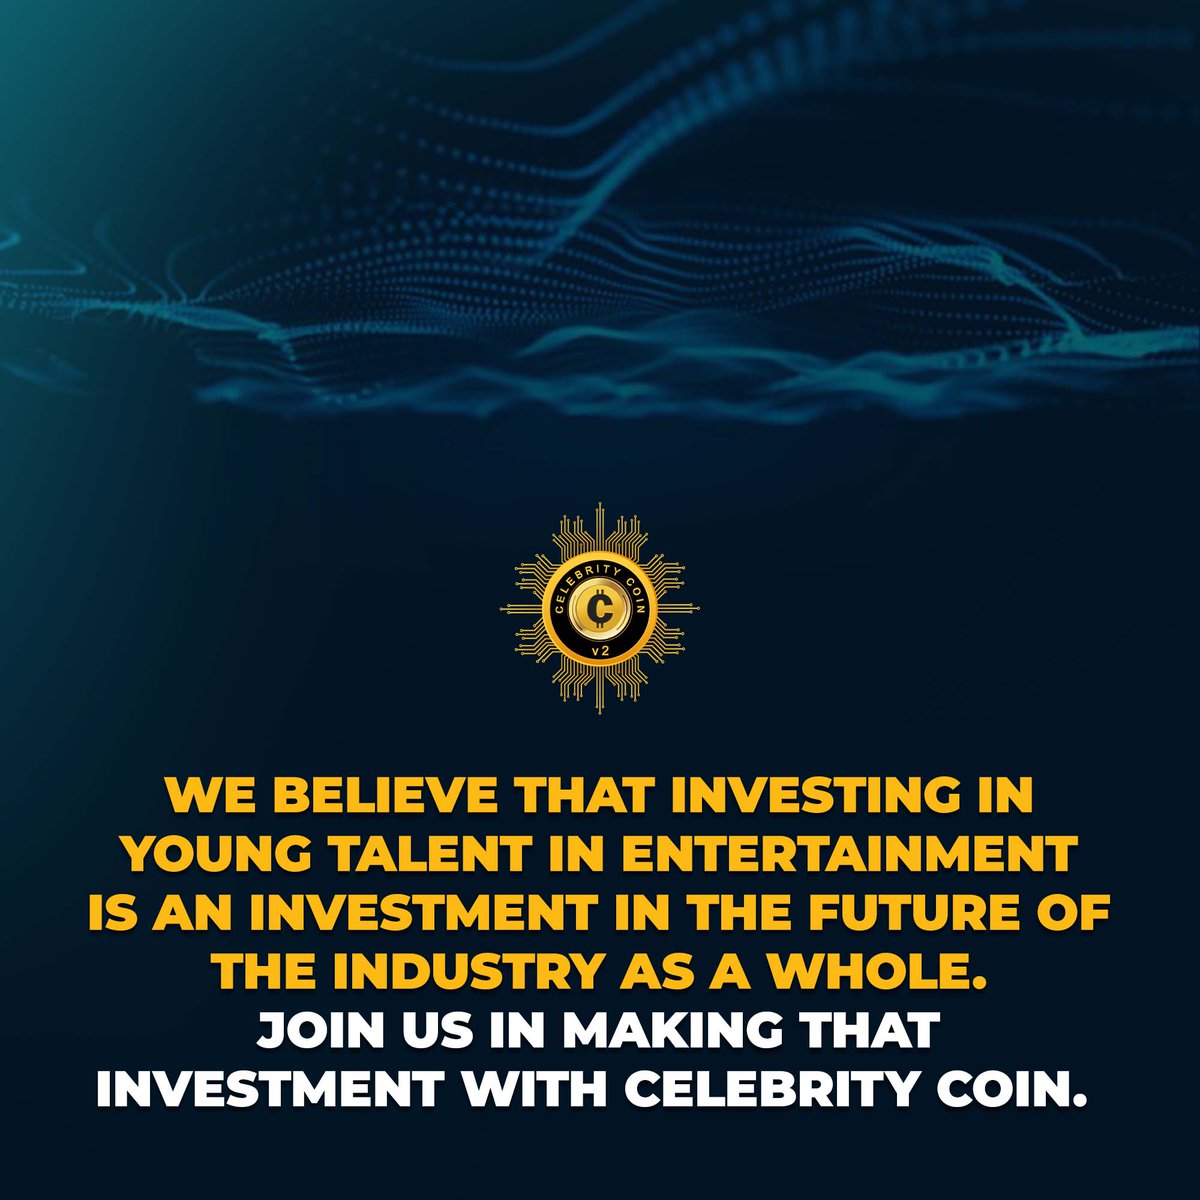 We believe that 𝗶𝗻𝘃𝗲𝘀𝘁𝗶𝗻𝗴 in
young talent in entertainment
is an 𝗶𝗻𝘃𝗲𝘀𝘁𝗺𝗲𝗻𝘁 𝗶𝗻 𝘁𝗵𝗲 𝗳𝘂𝘁𝘂𝗿𝗲 of
the industry as a whole.
𝗝𝗼𝗶𝗻 𝘂𝘀 in making that
investment with 𝐂𝐞𝐥𝐞𝐛𝐫𝐢𝐭𝐲 𝐂𝐨𝐢𝐧.

#STUDIONATION2 #celebritycoin #investing #cryptocurrency